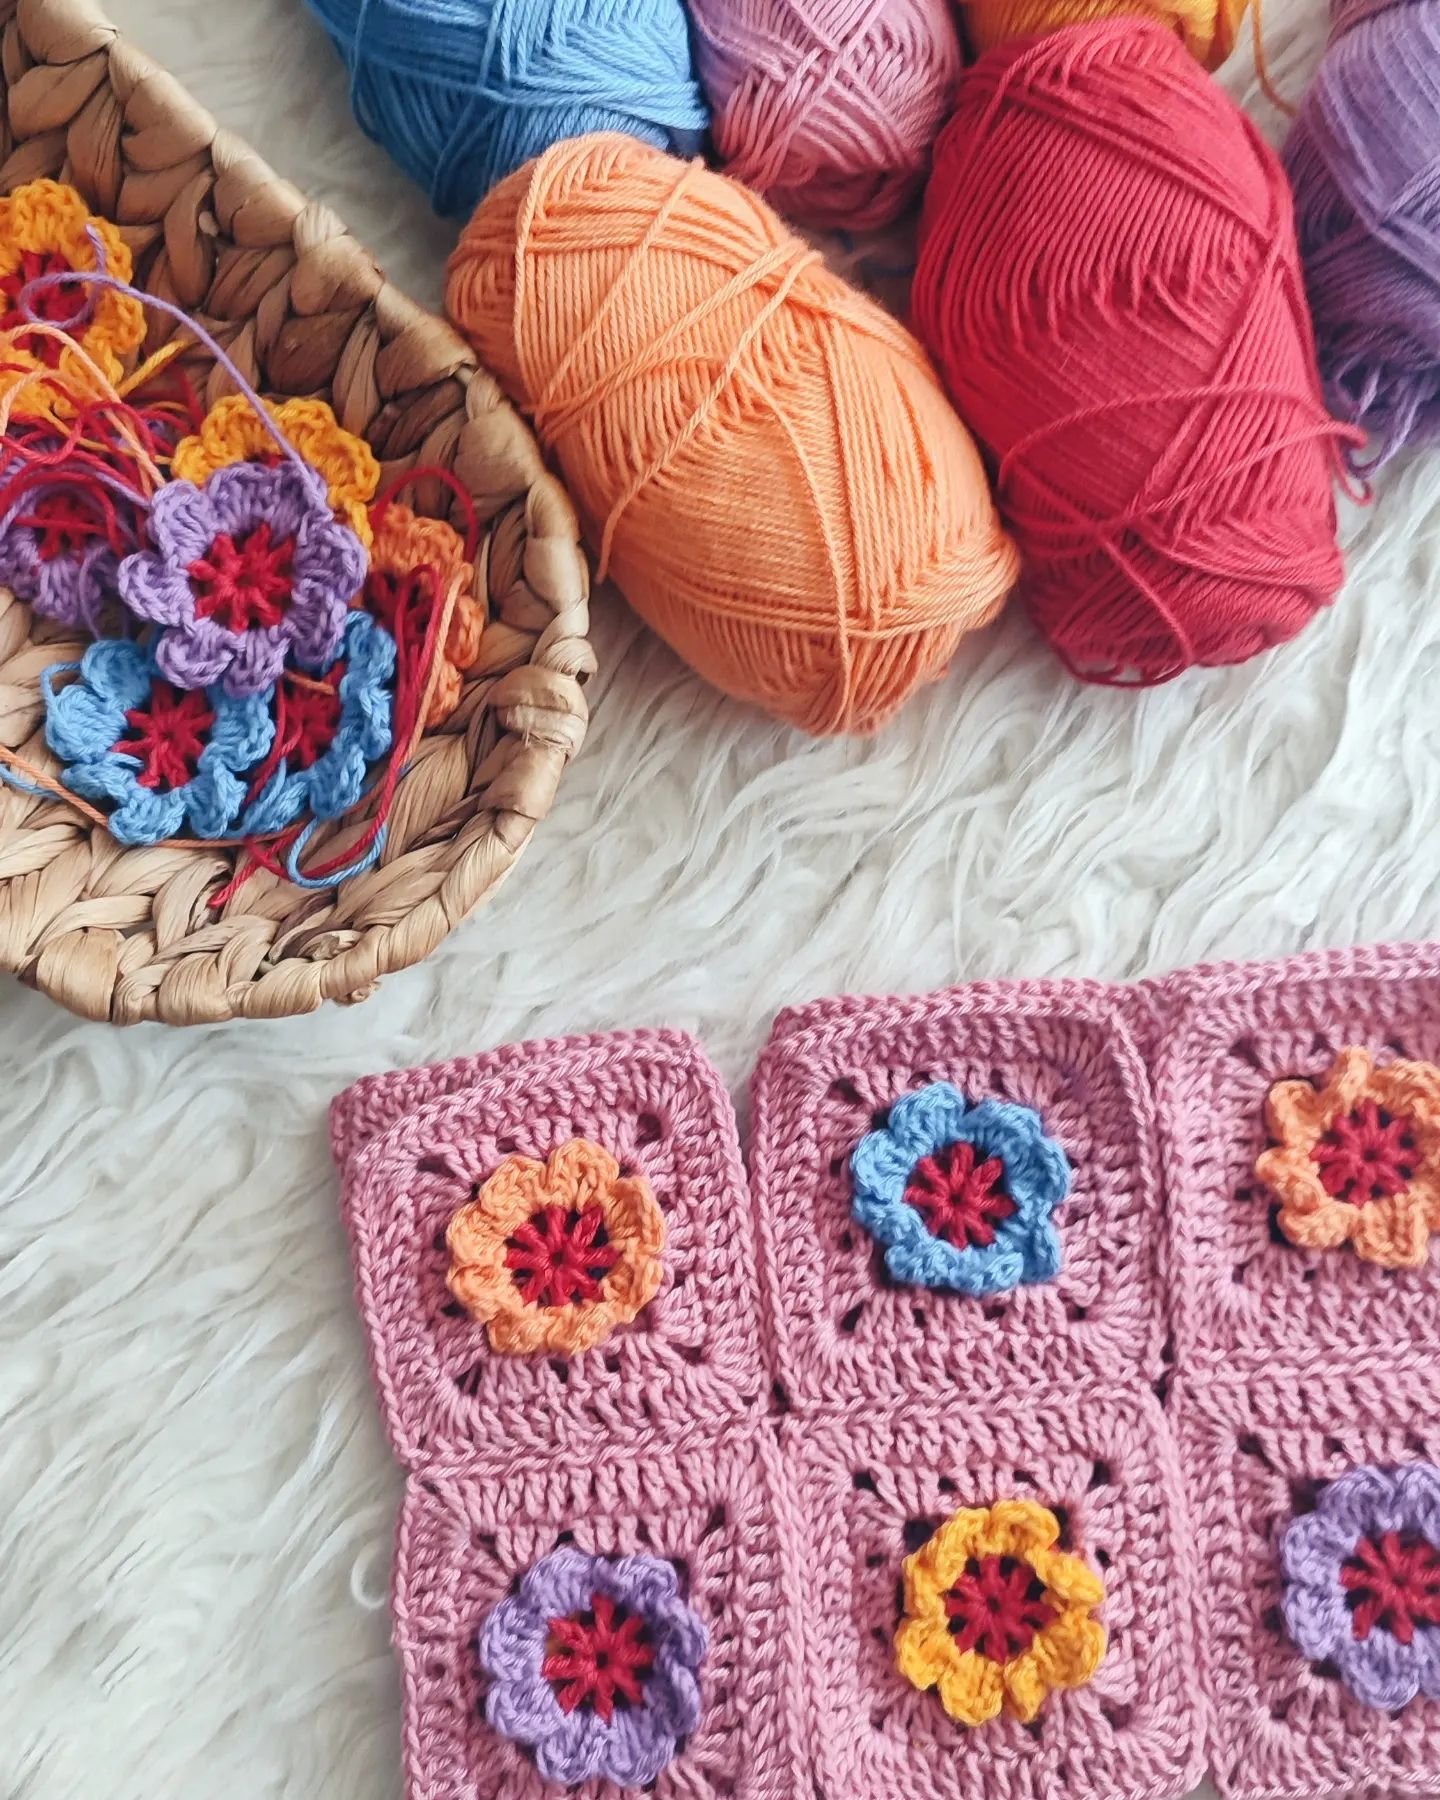 Working on some flower granny squares today ! 🌸❤️🌹🌷
.
I'm using the pretty and colorful Zing crochet hook set from @knitproeu to work my grannies and I couldn't be more excited! The set comes in 9 sizes making it ideal for every project! 👌
.
#cro